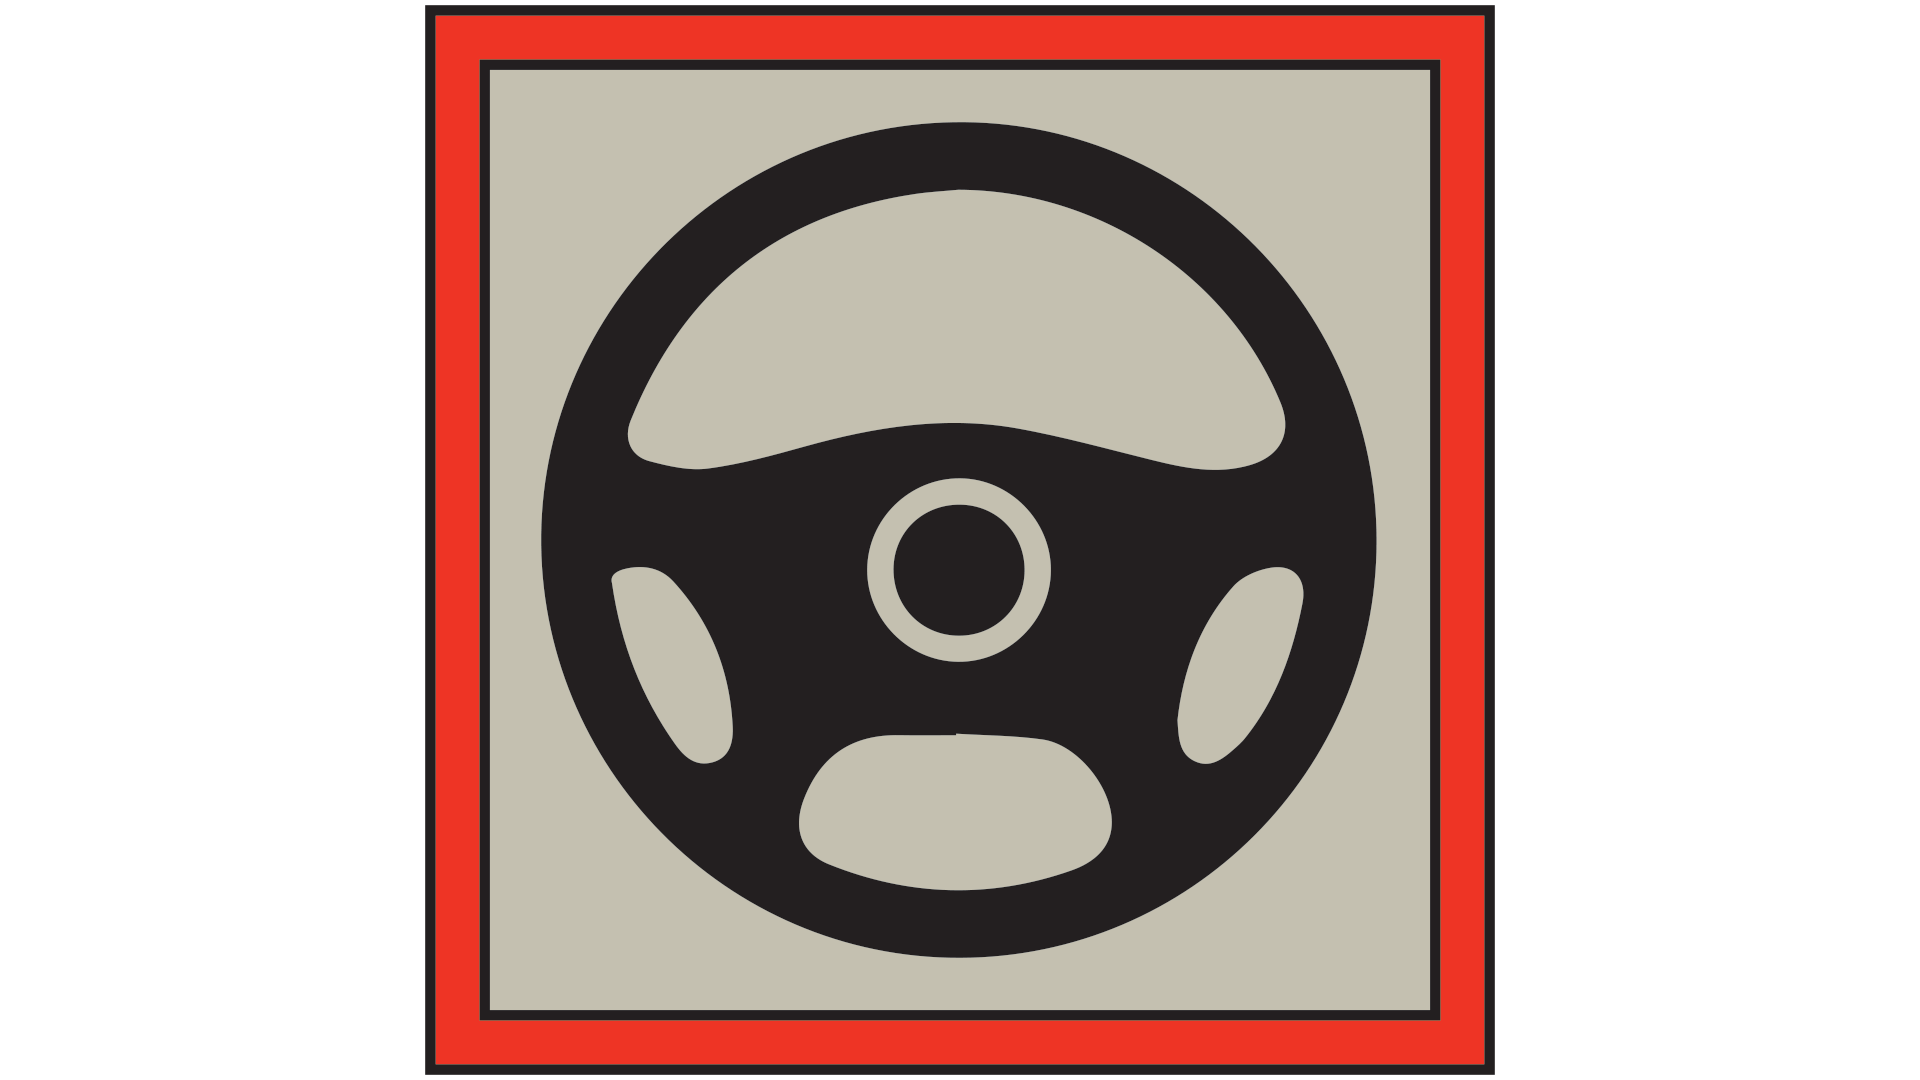 Icon for Friday Driver